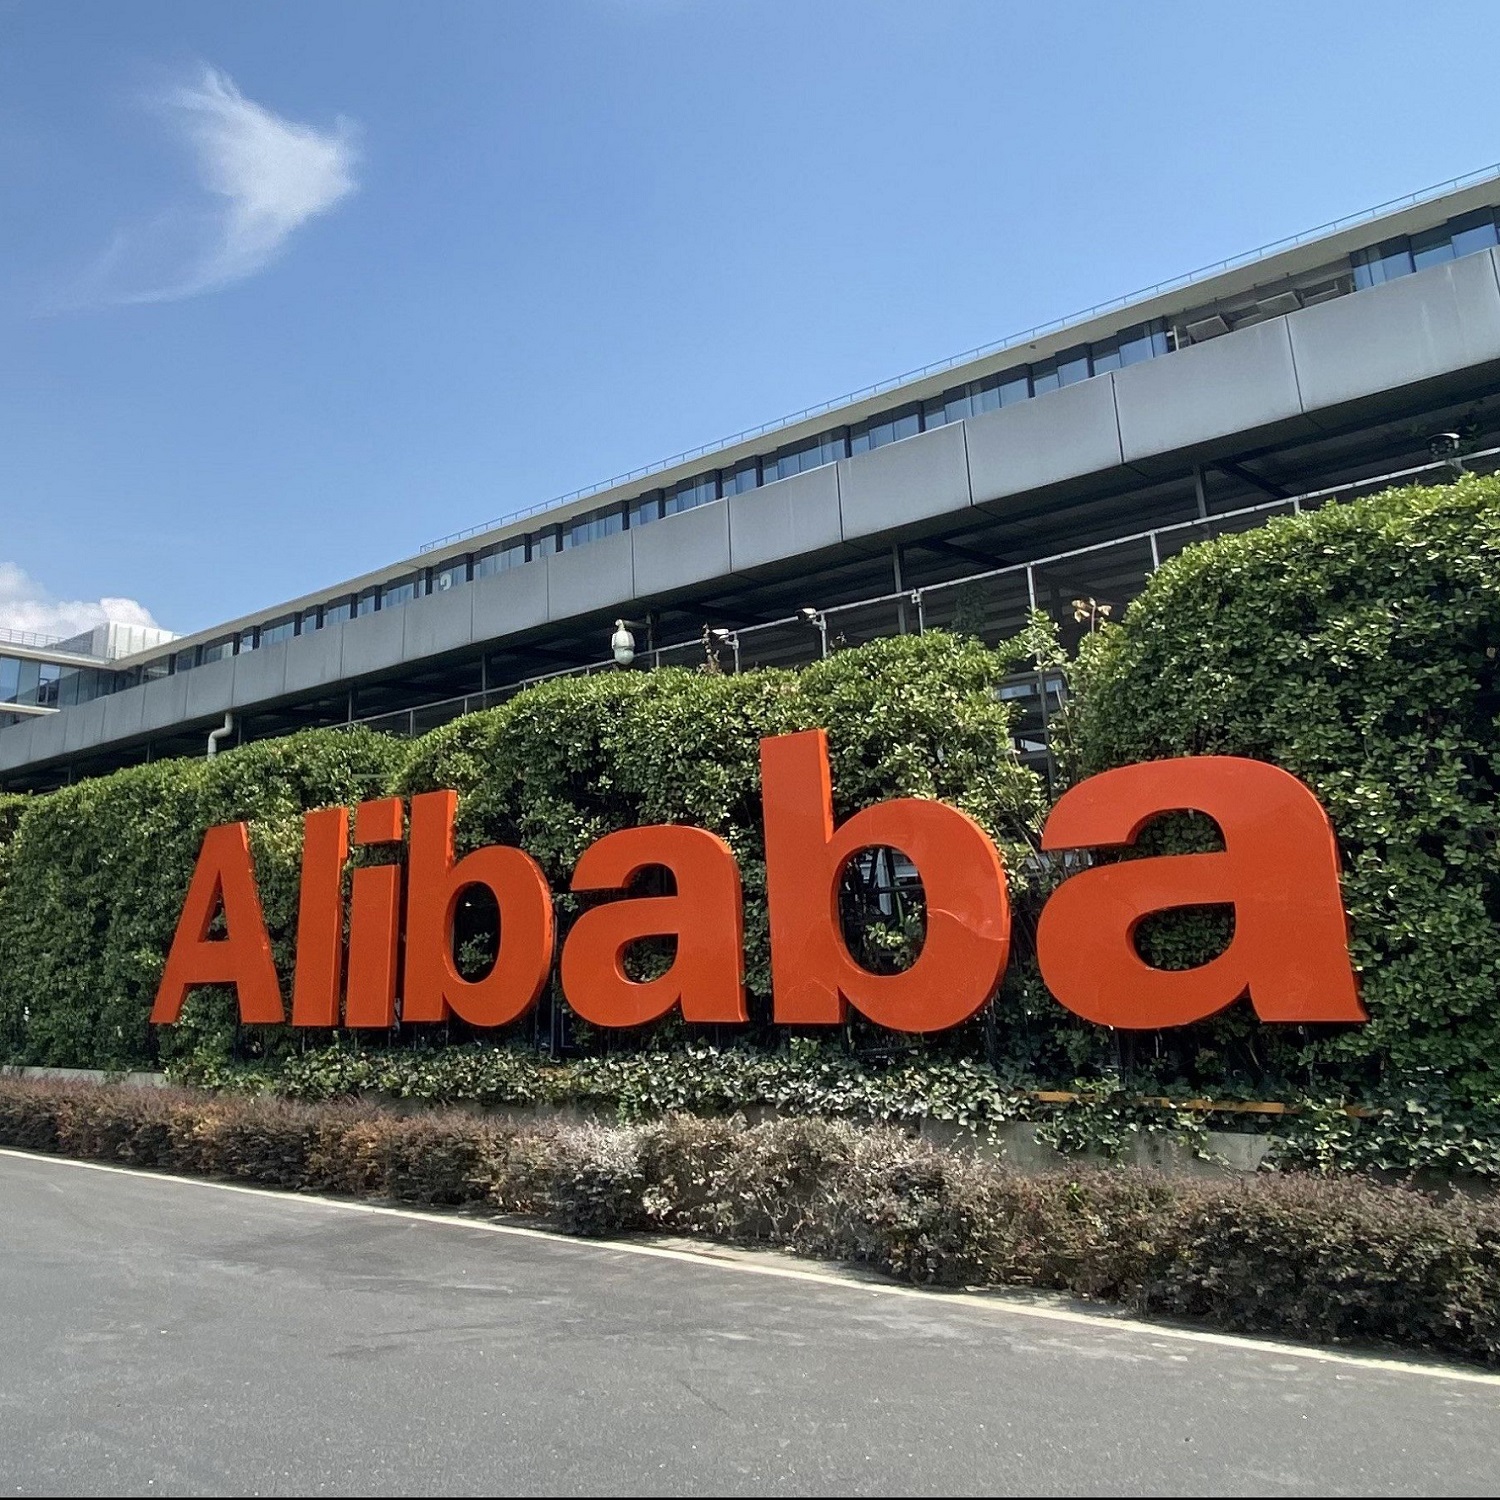 Alibaba Group Announces Withdrawal of Cainiao IPO Application and Proposal to Acquire All Outstanding Shares from Cainiao Minority Shareholders